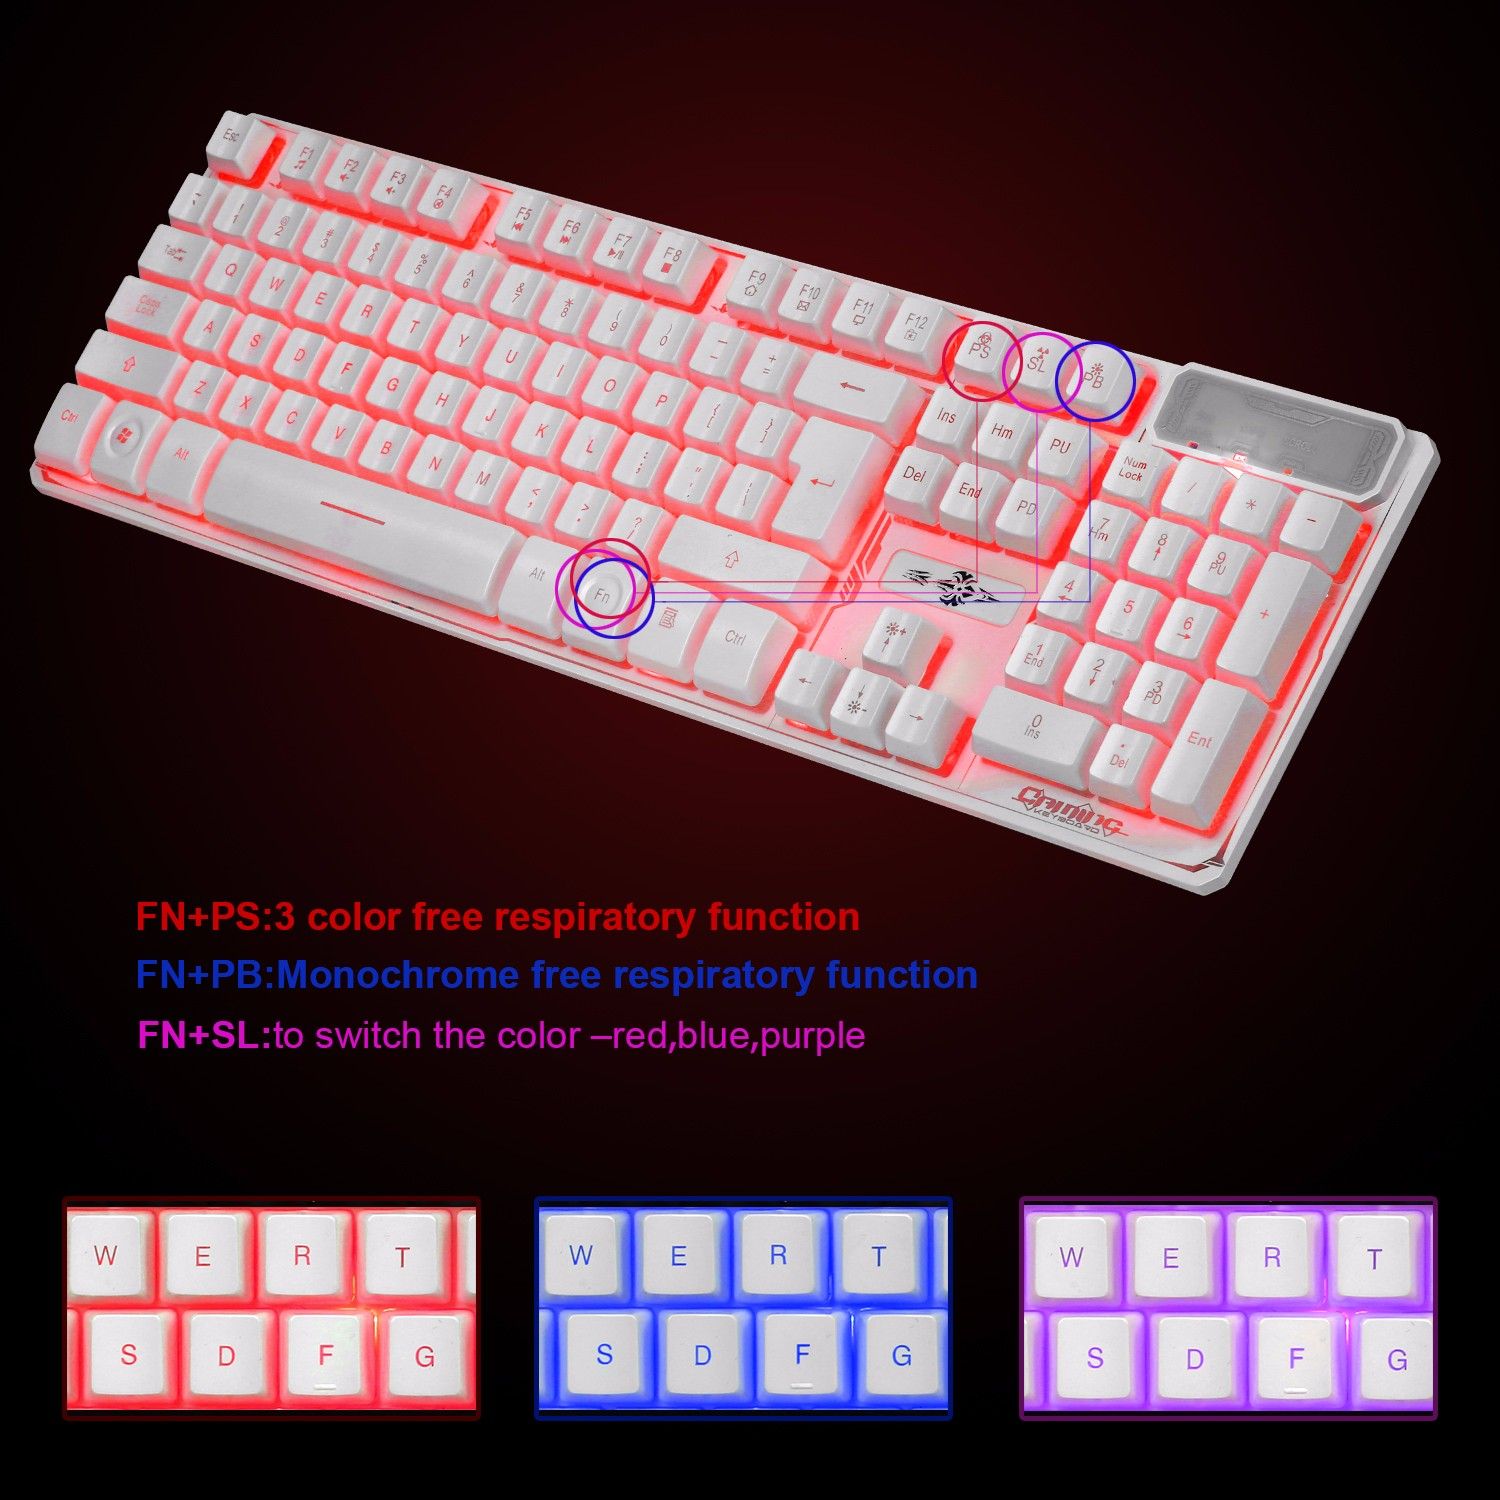 A879W-Wired-3-color-Adjustable-Backlit-Gaming-Keyboard-White-1114352